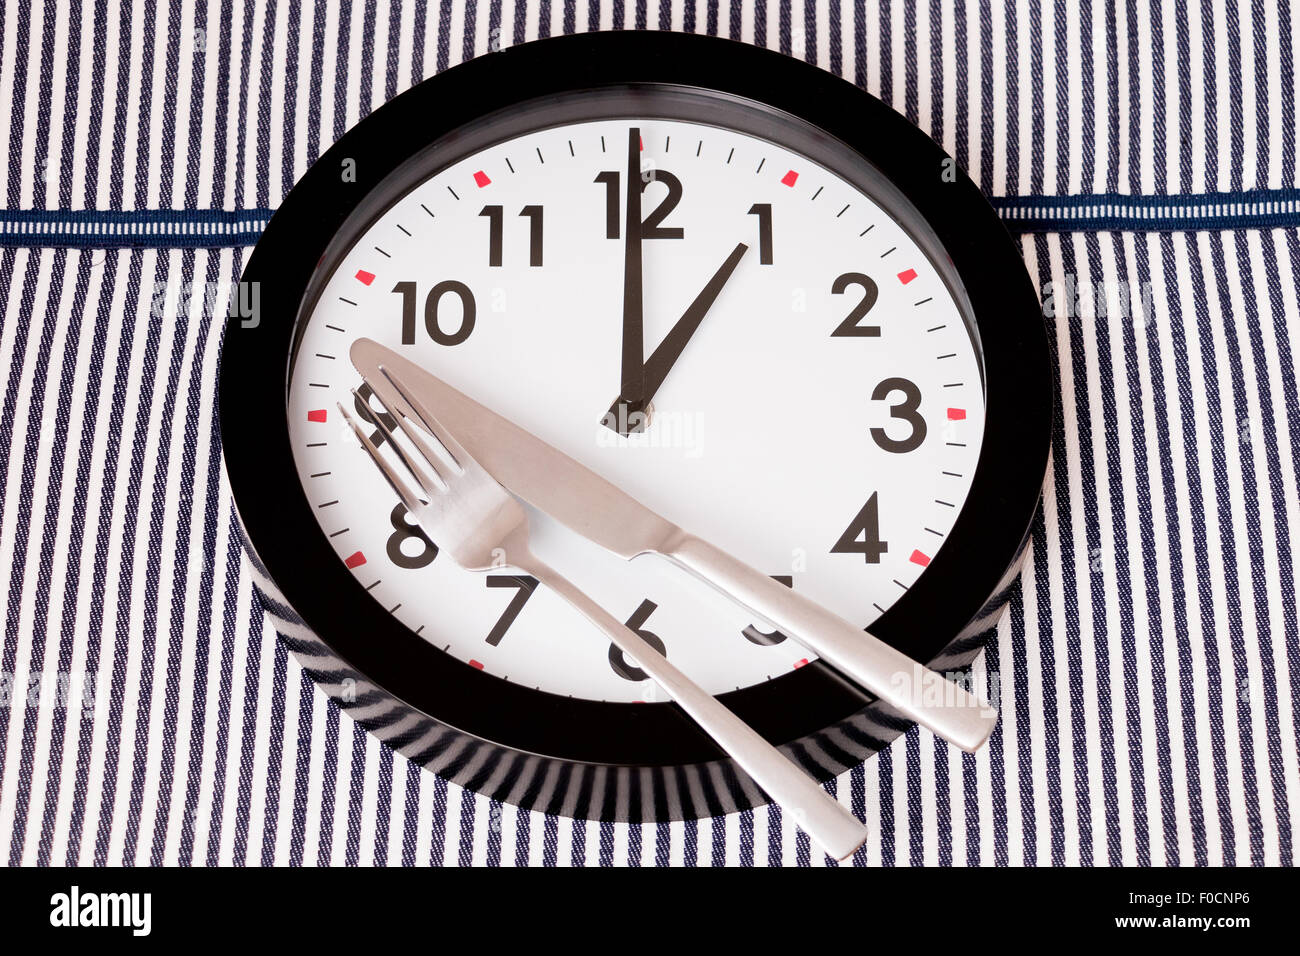 One o’clock, it’s lunch time. Stock Photo